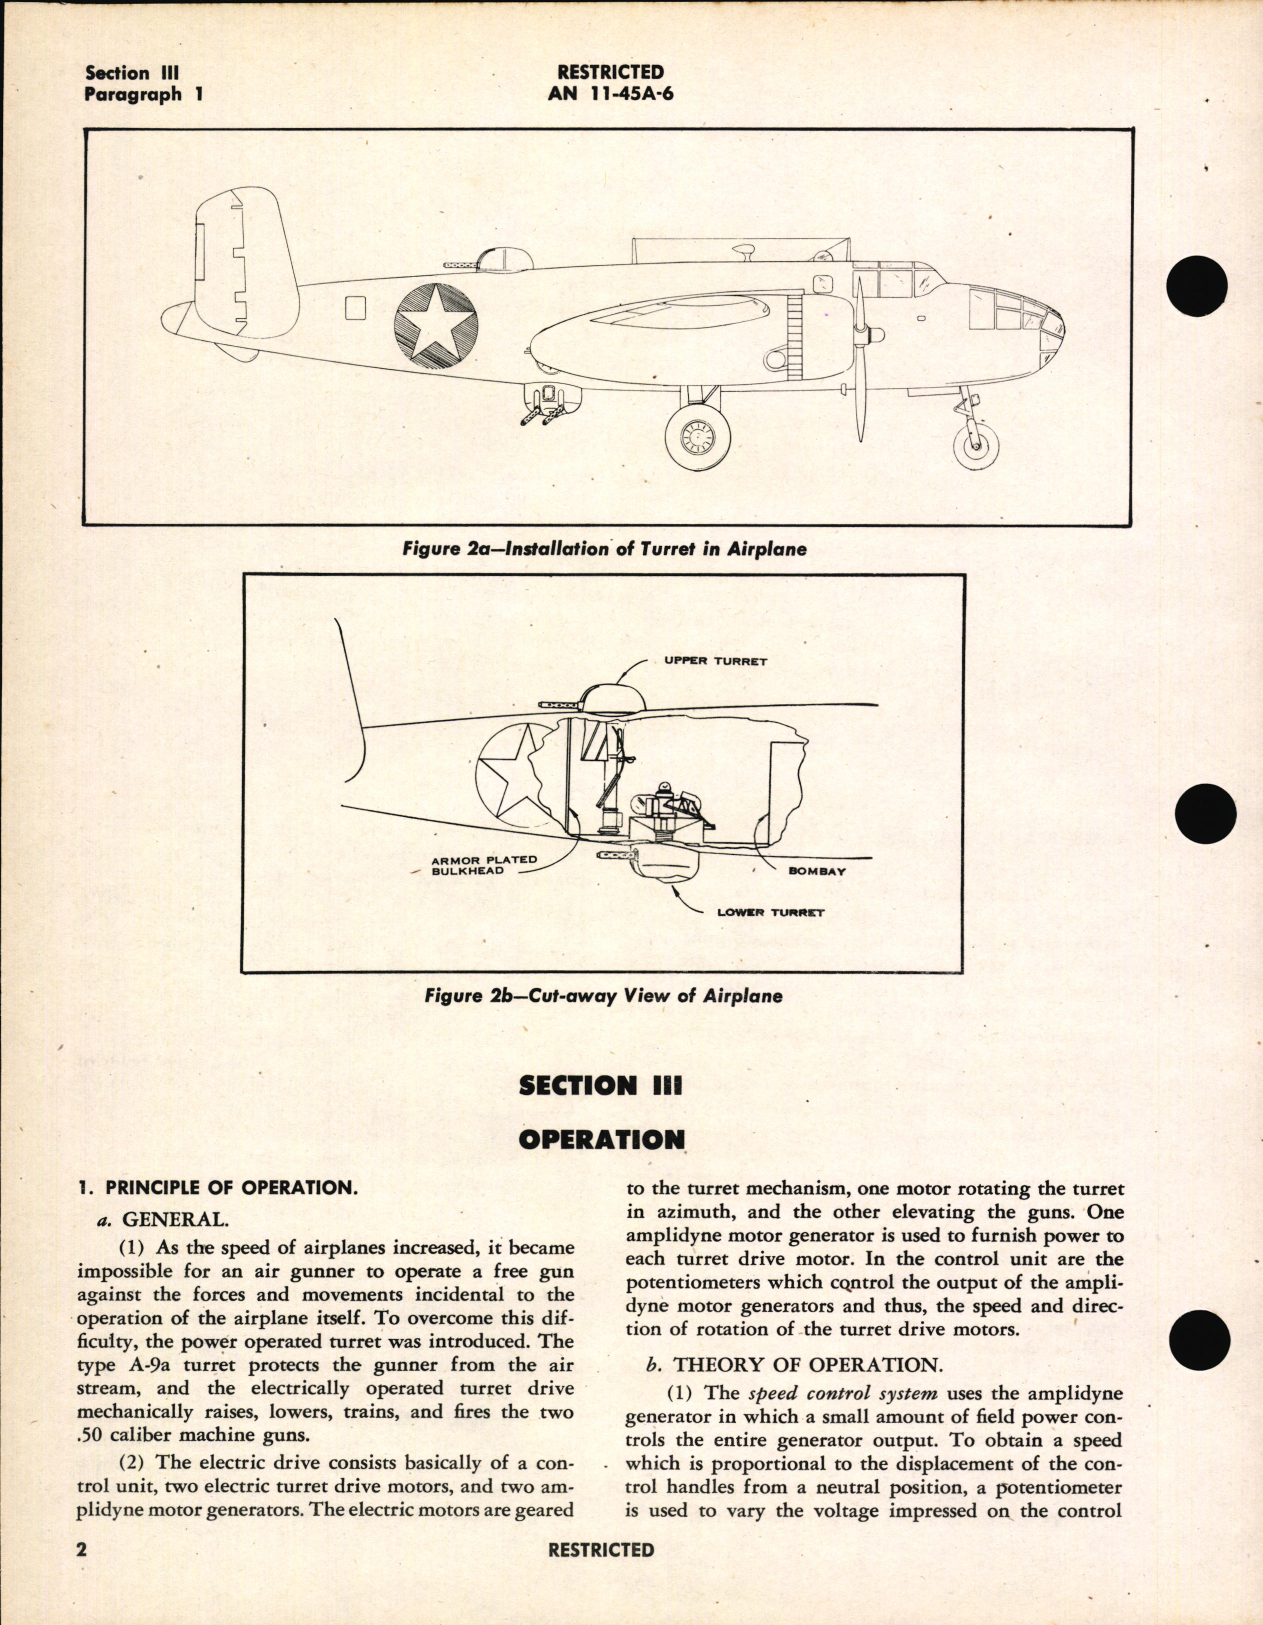 Sample page 6 from AirCorps Library document: Overhaul Instructions for Upper Turret Type A-9A, Navy Model 250CE-3